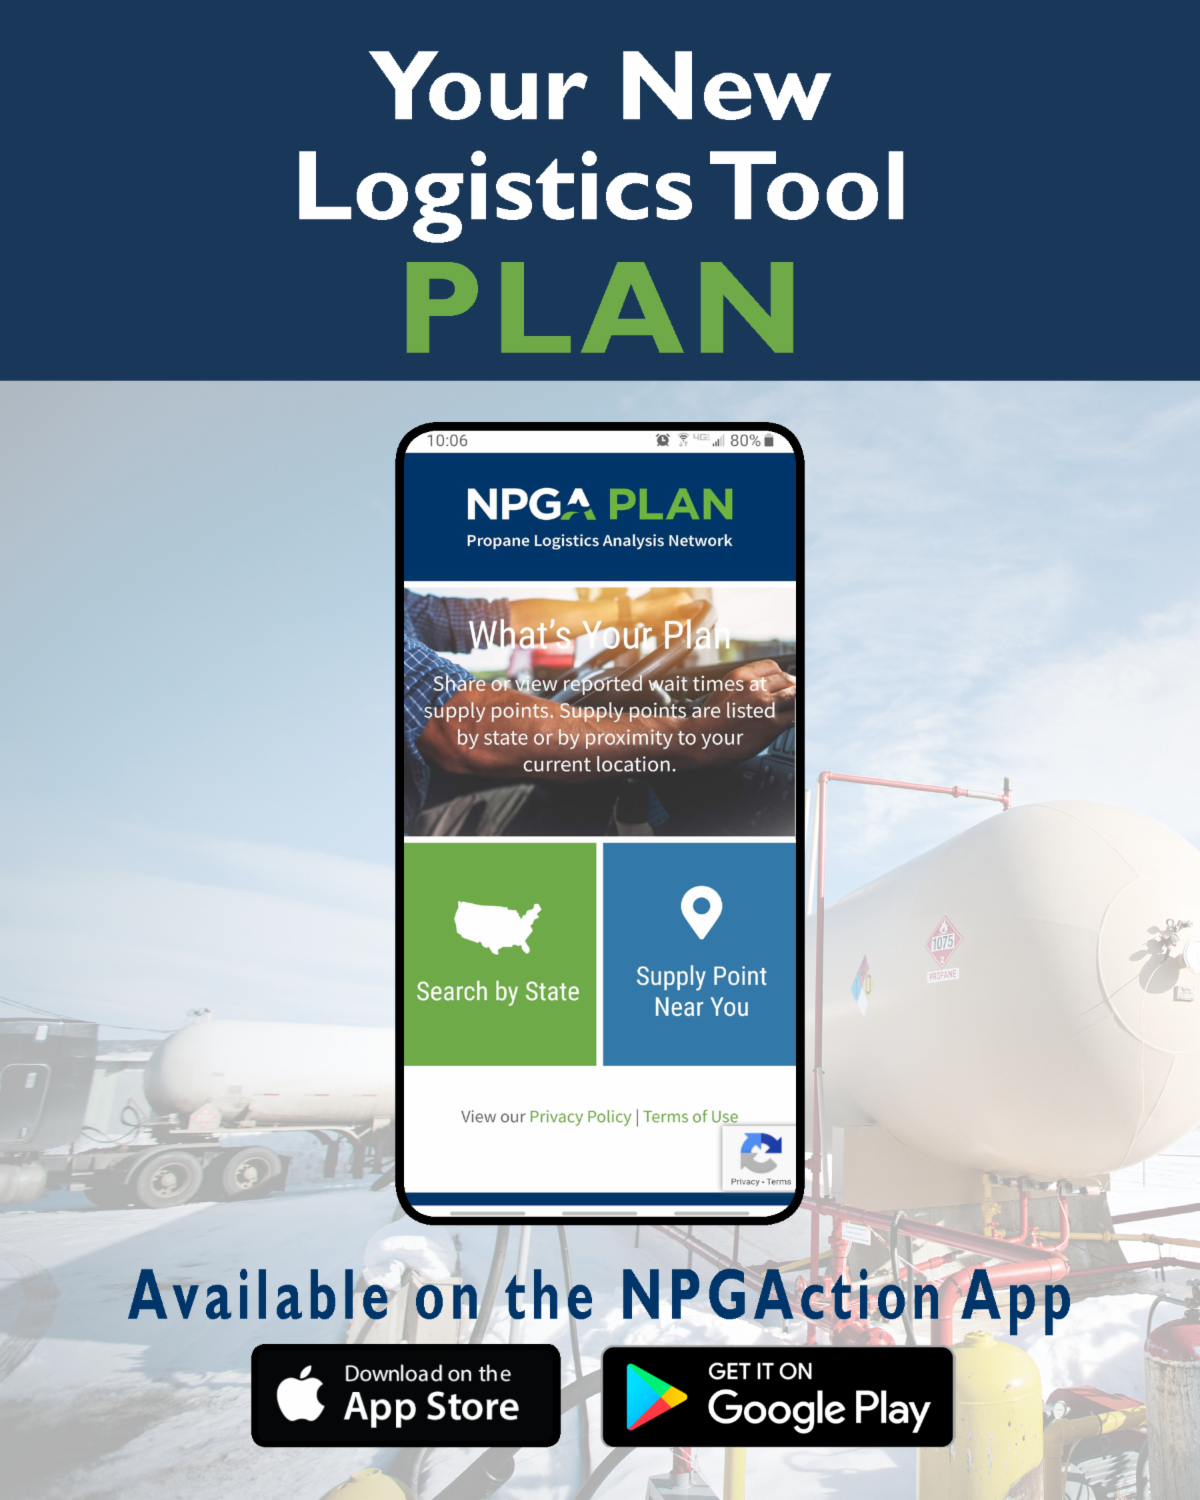 NPGA launches Propane Logisitics Plan Online Network Tool For LPG Drivers to Input wait times at terminals, etc., reports BPN the propane industry's trusted source for news and info since 1939. 10-10-19